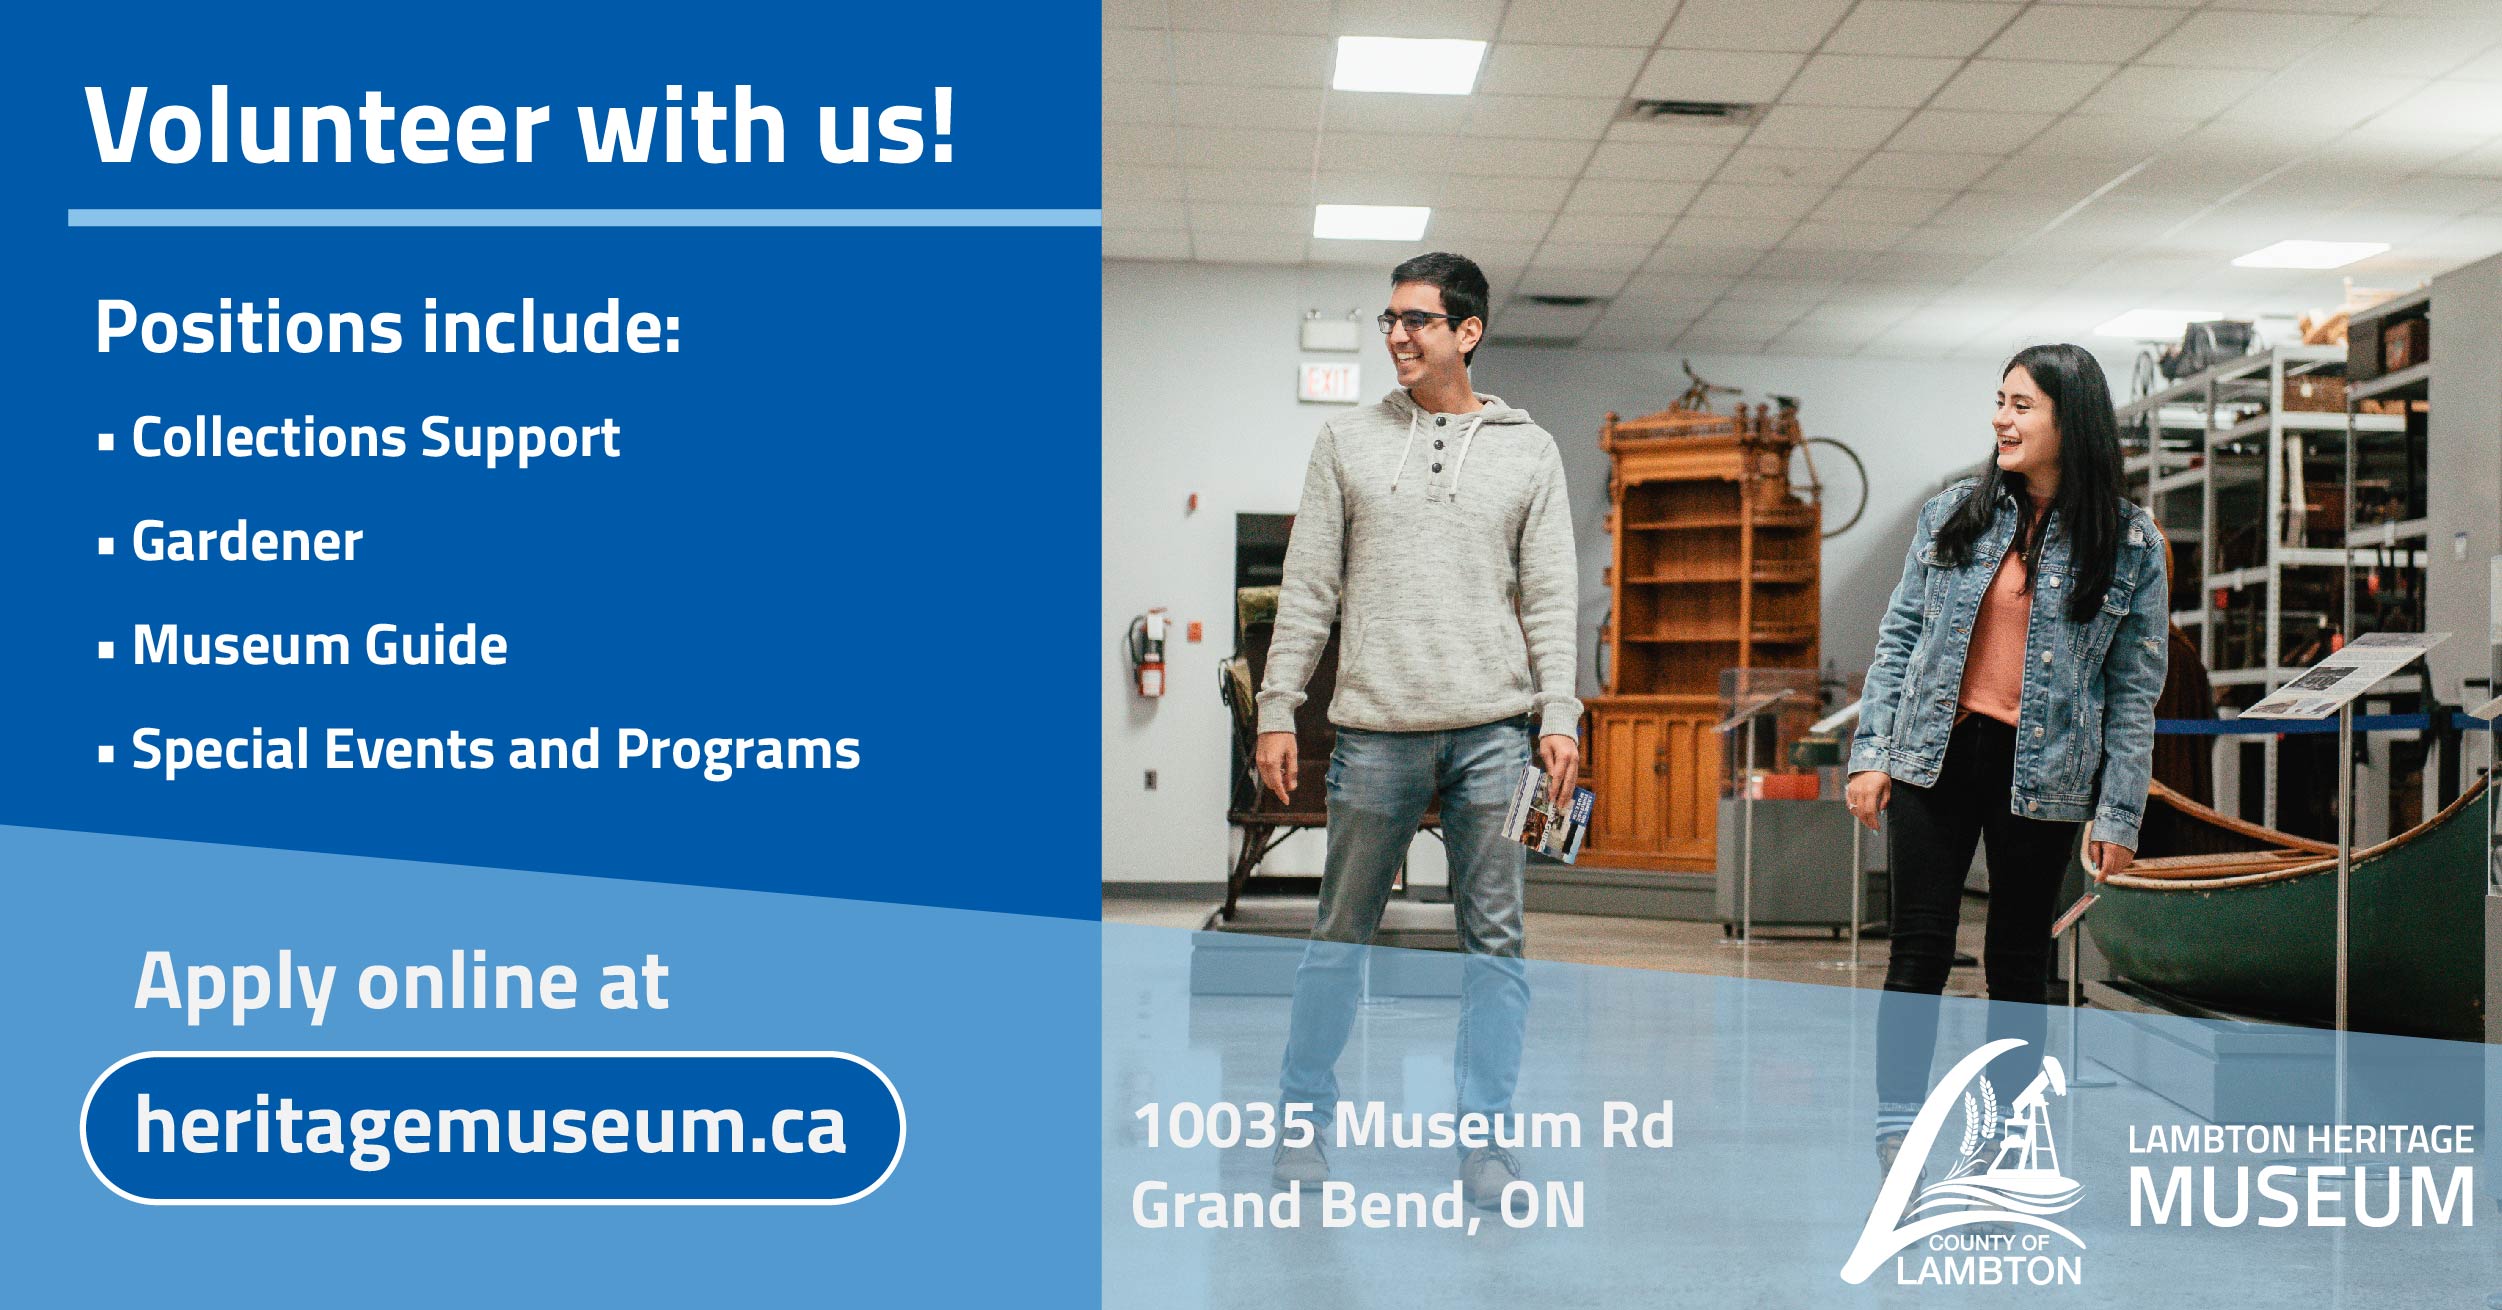 Volunteer with us! text over blue background, beside photo of two people in the collections centre at Lambton Heritage Museum